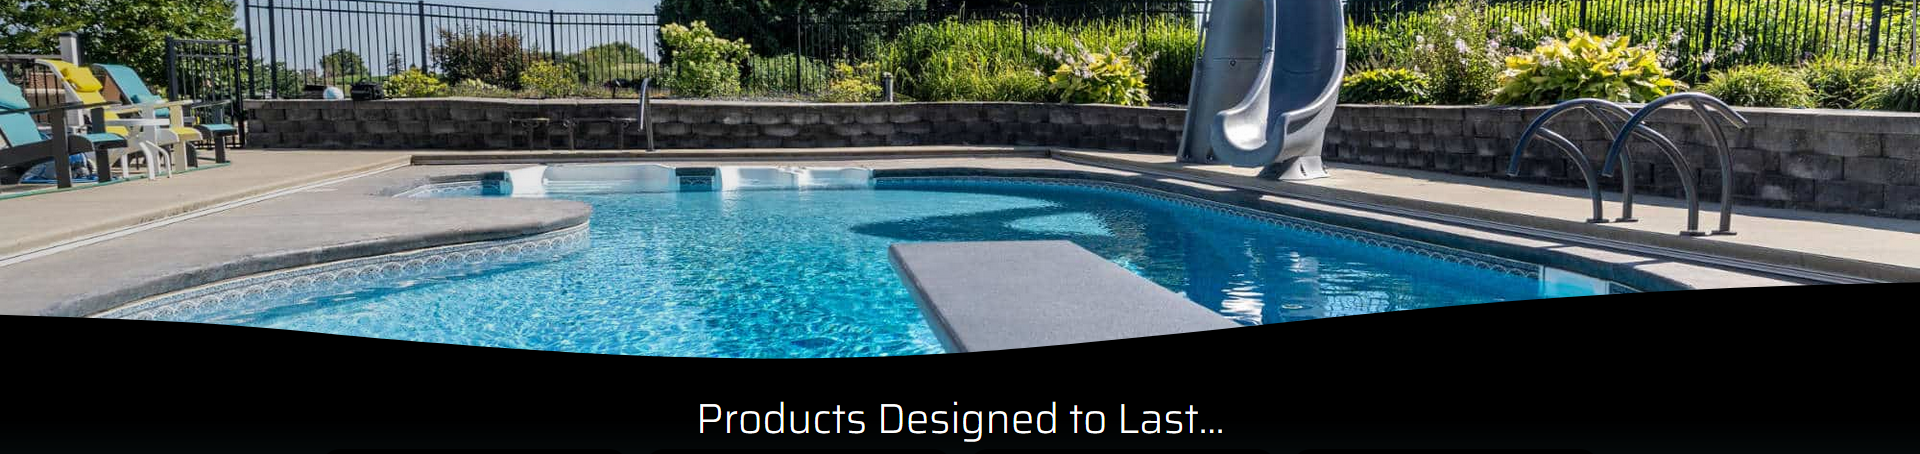 Global Pool Products